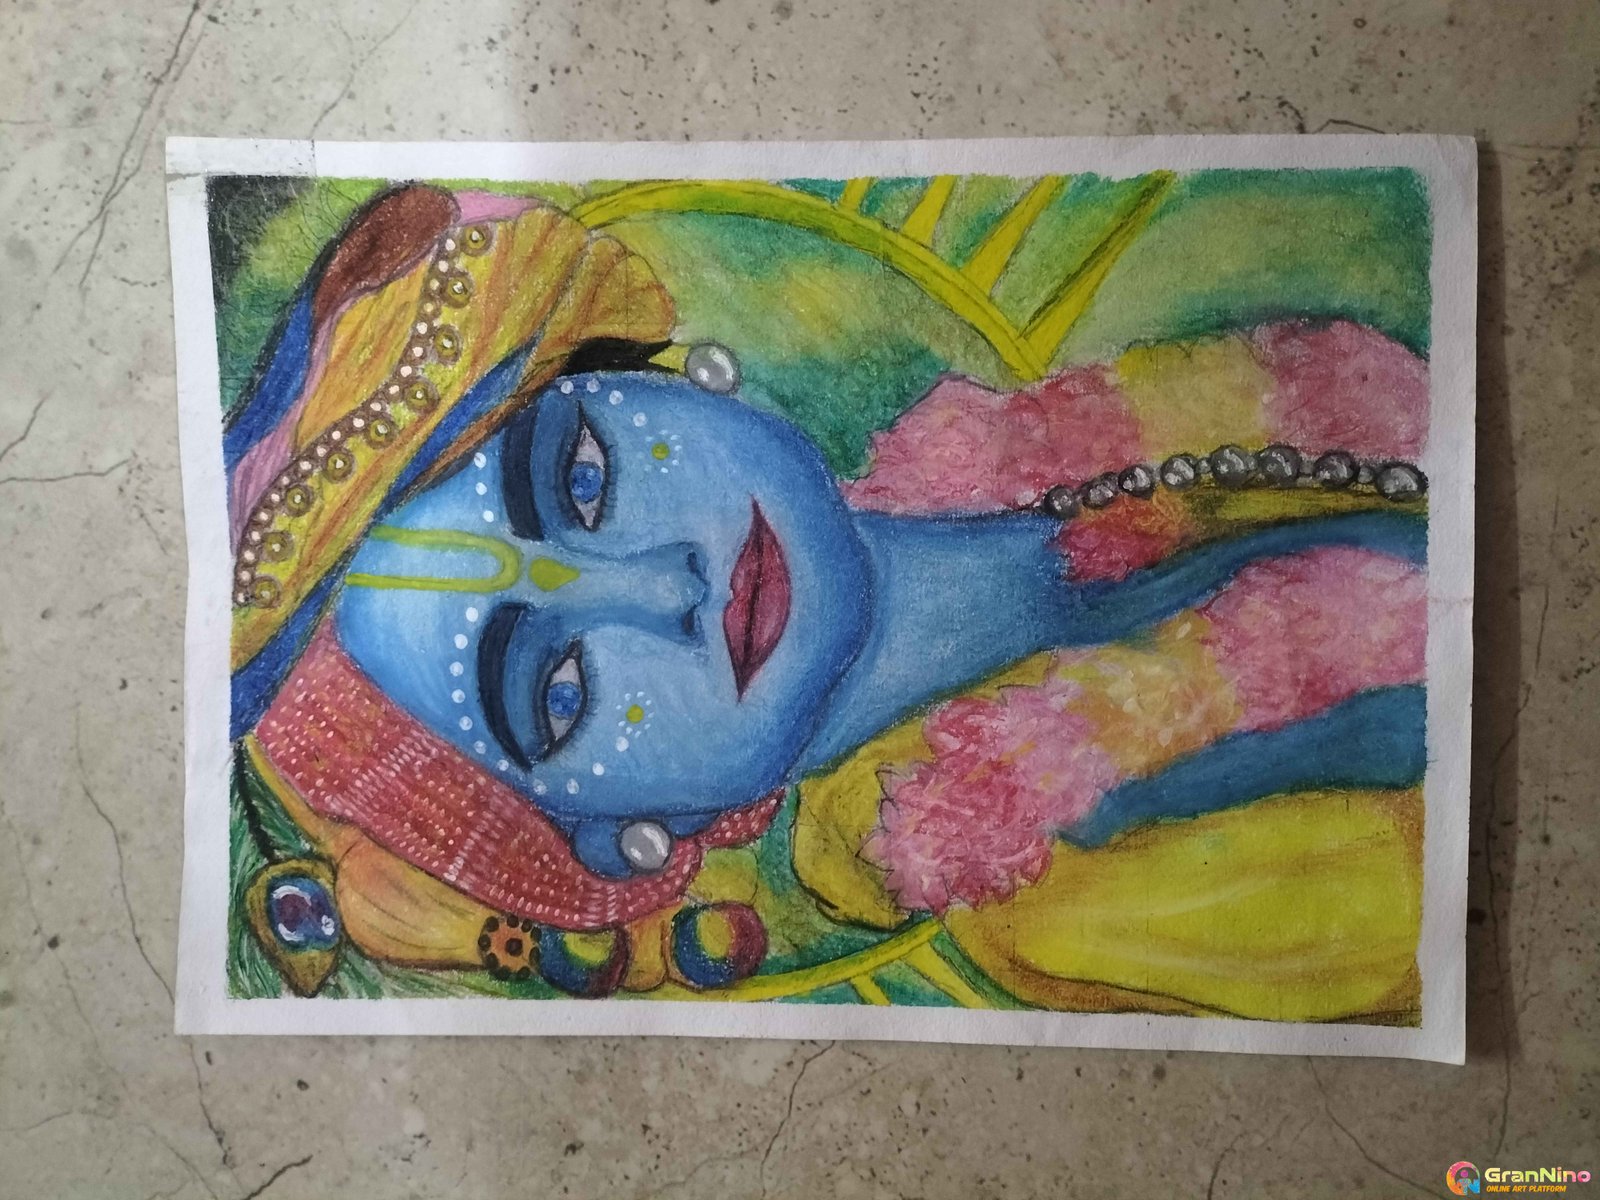 Aparna Gayen Art - LORD KRISHNA.🙏💙💙💙💙 drawing with Oil pastel Colours.  🥰🙏 Creative drawing from my thoughts. Used the Colours after long time.  Feel free to comment your opinion. . . Full